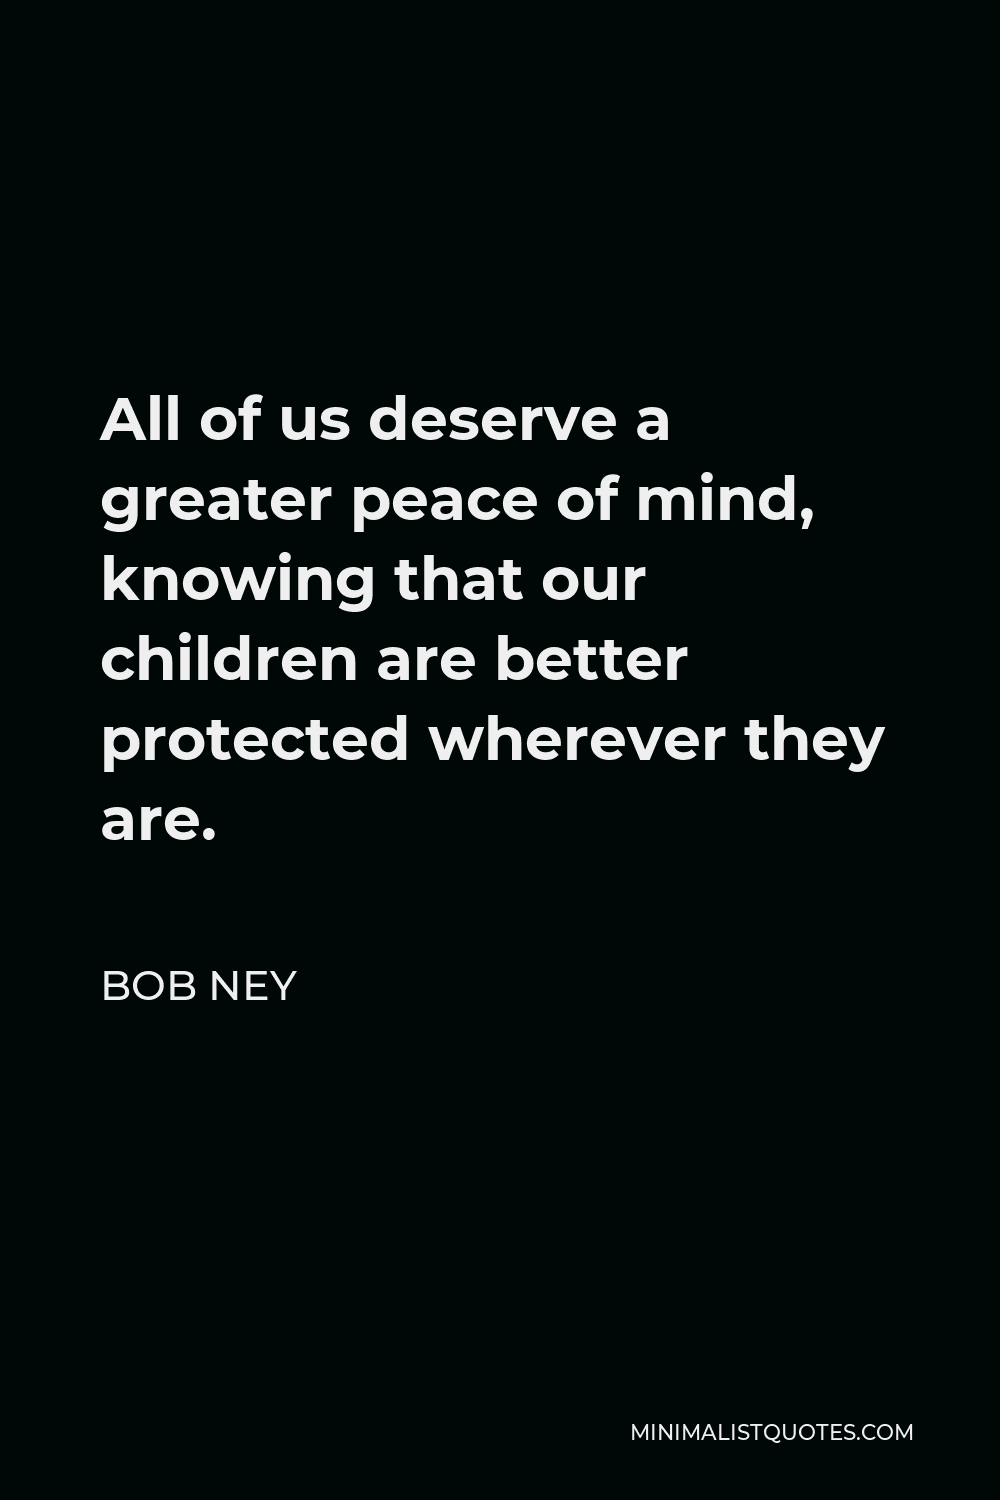 Bob Ney Quote - All of us deserve a greater peace of mind, knowing that our children are better protected wherever they are.